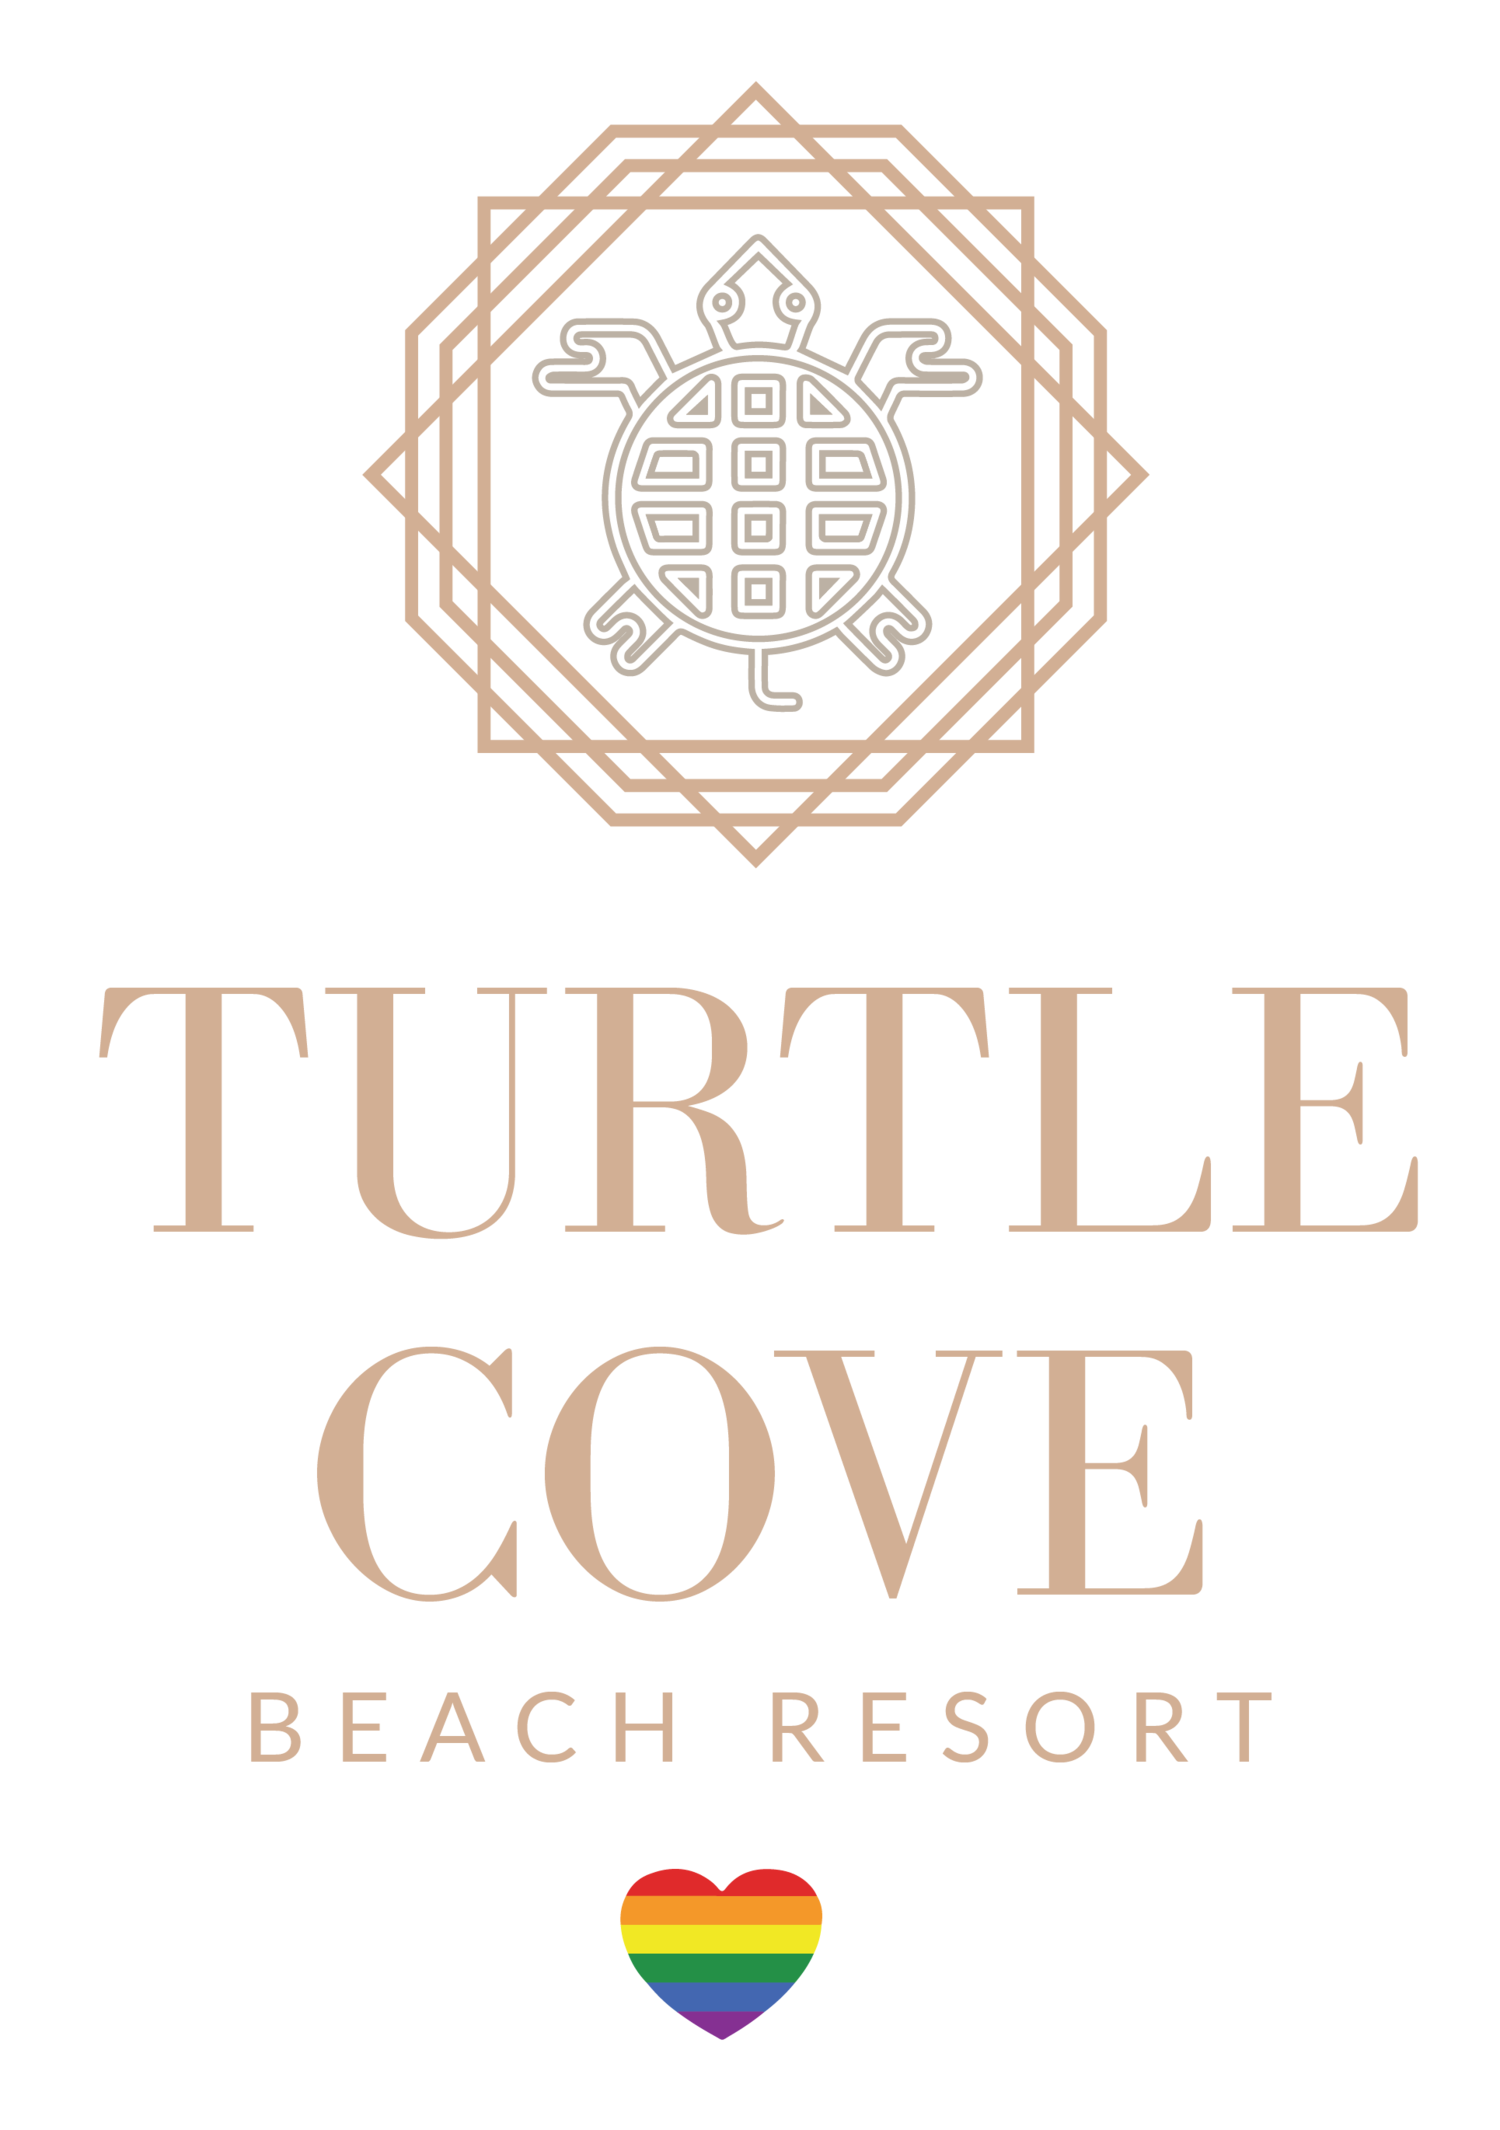 Turtle Cove Beach Resort "ADULTS ONLY" Port Douglas,Cairns